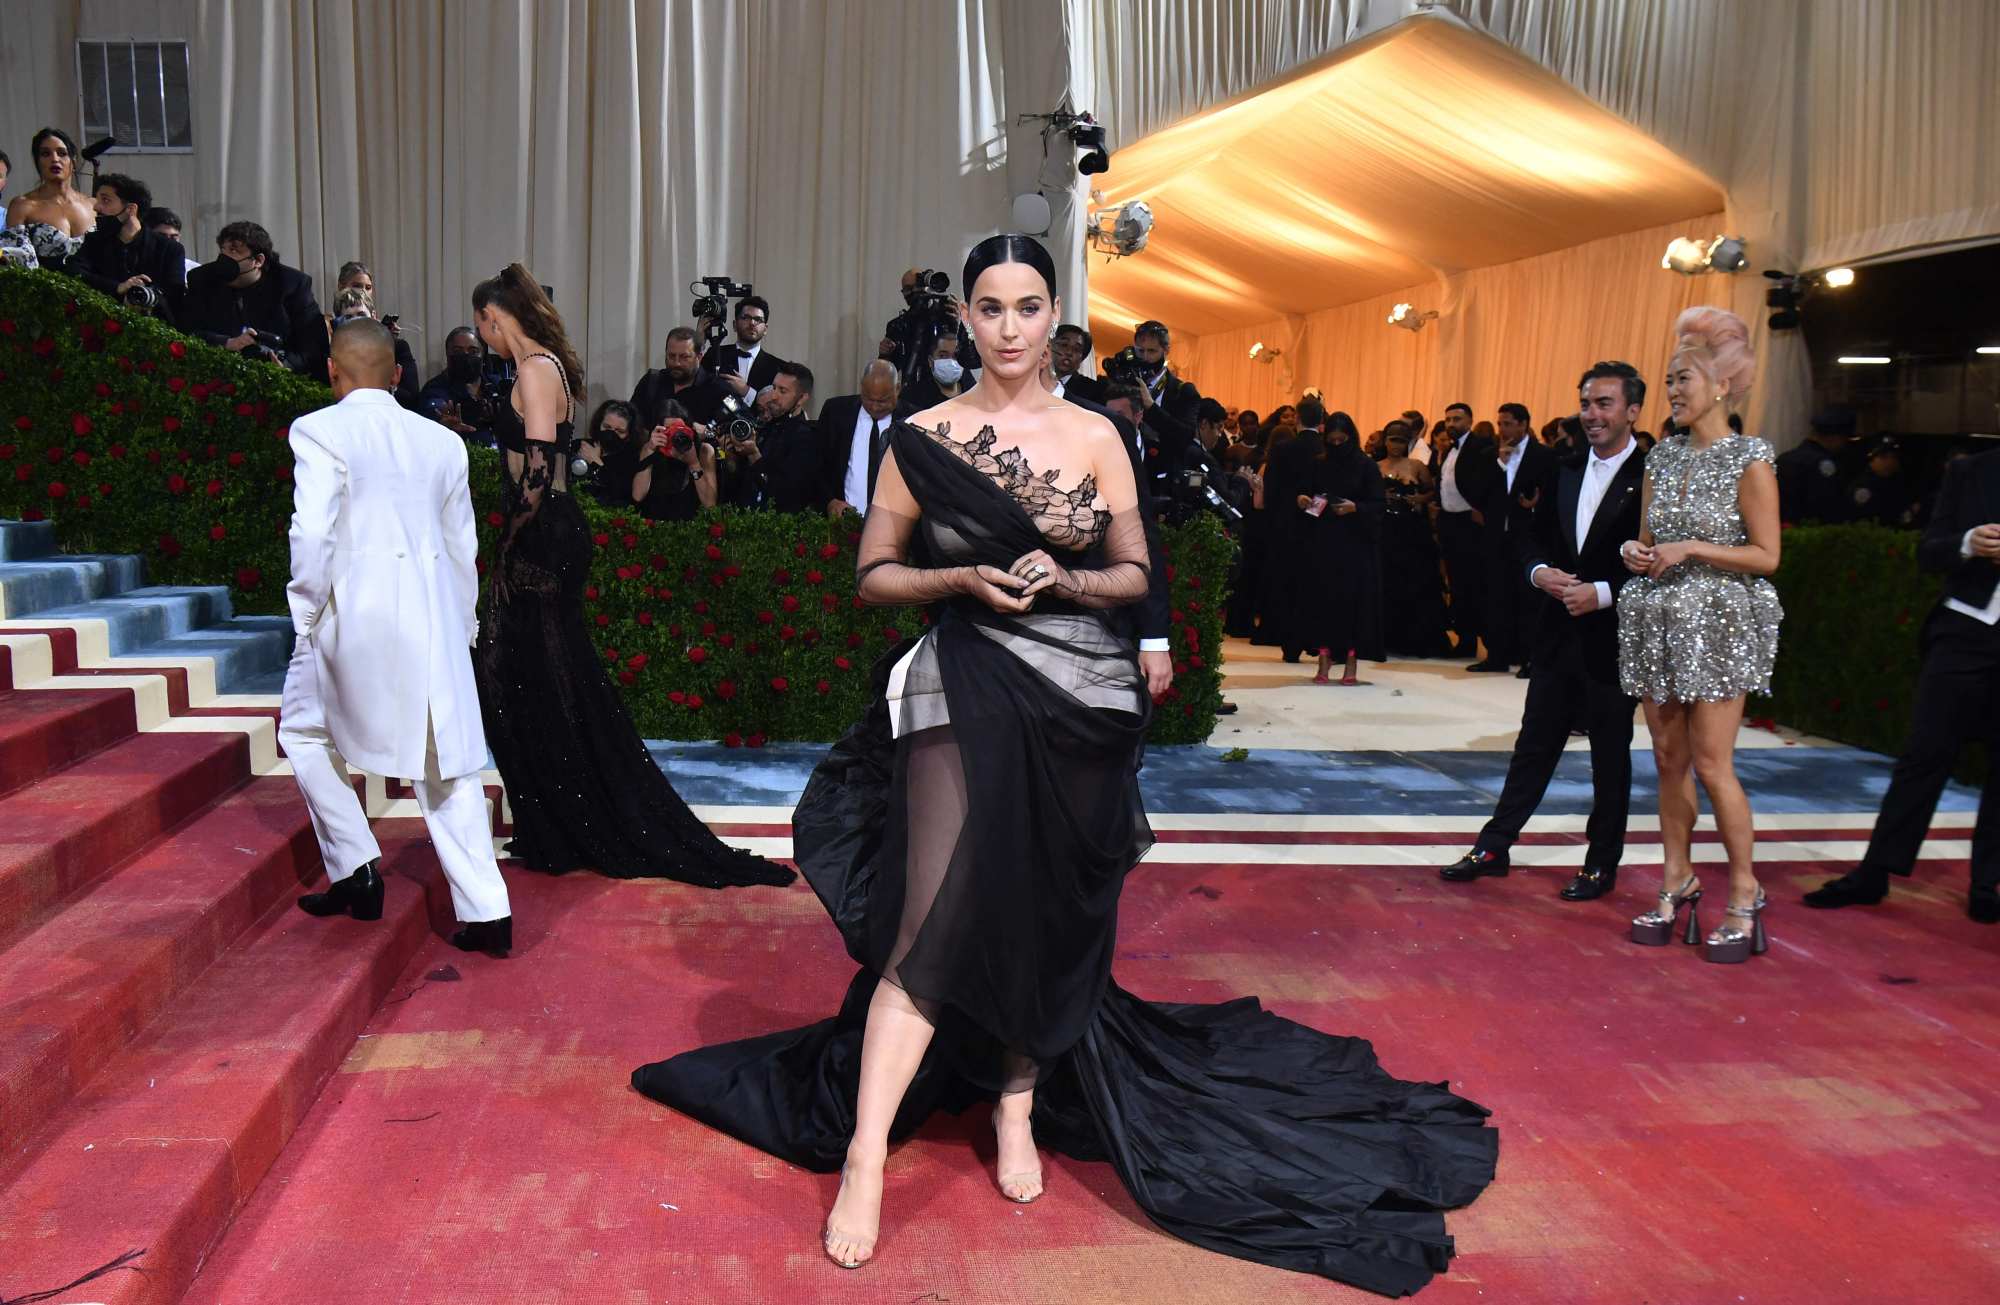 US singer Katy Perry arriving at the Met Gala 2022 in a black ensemble. Photo: AFP